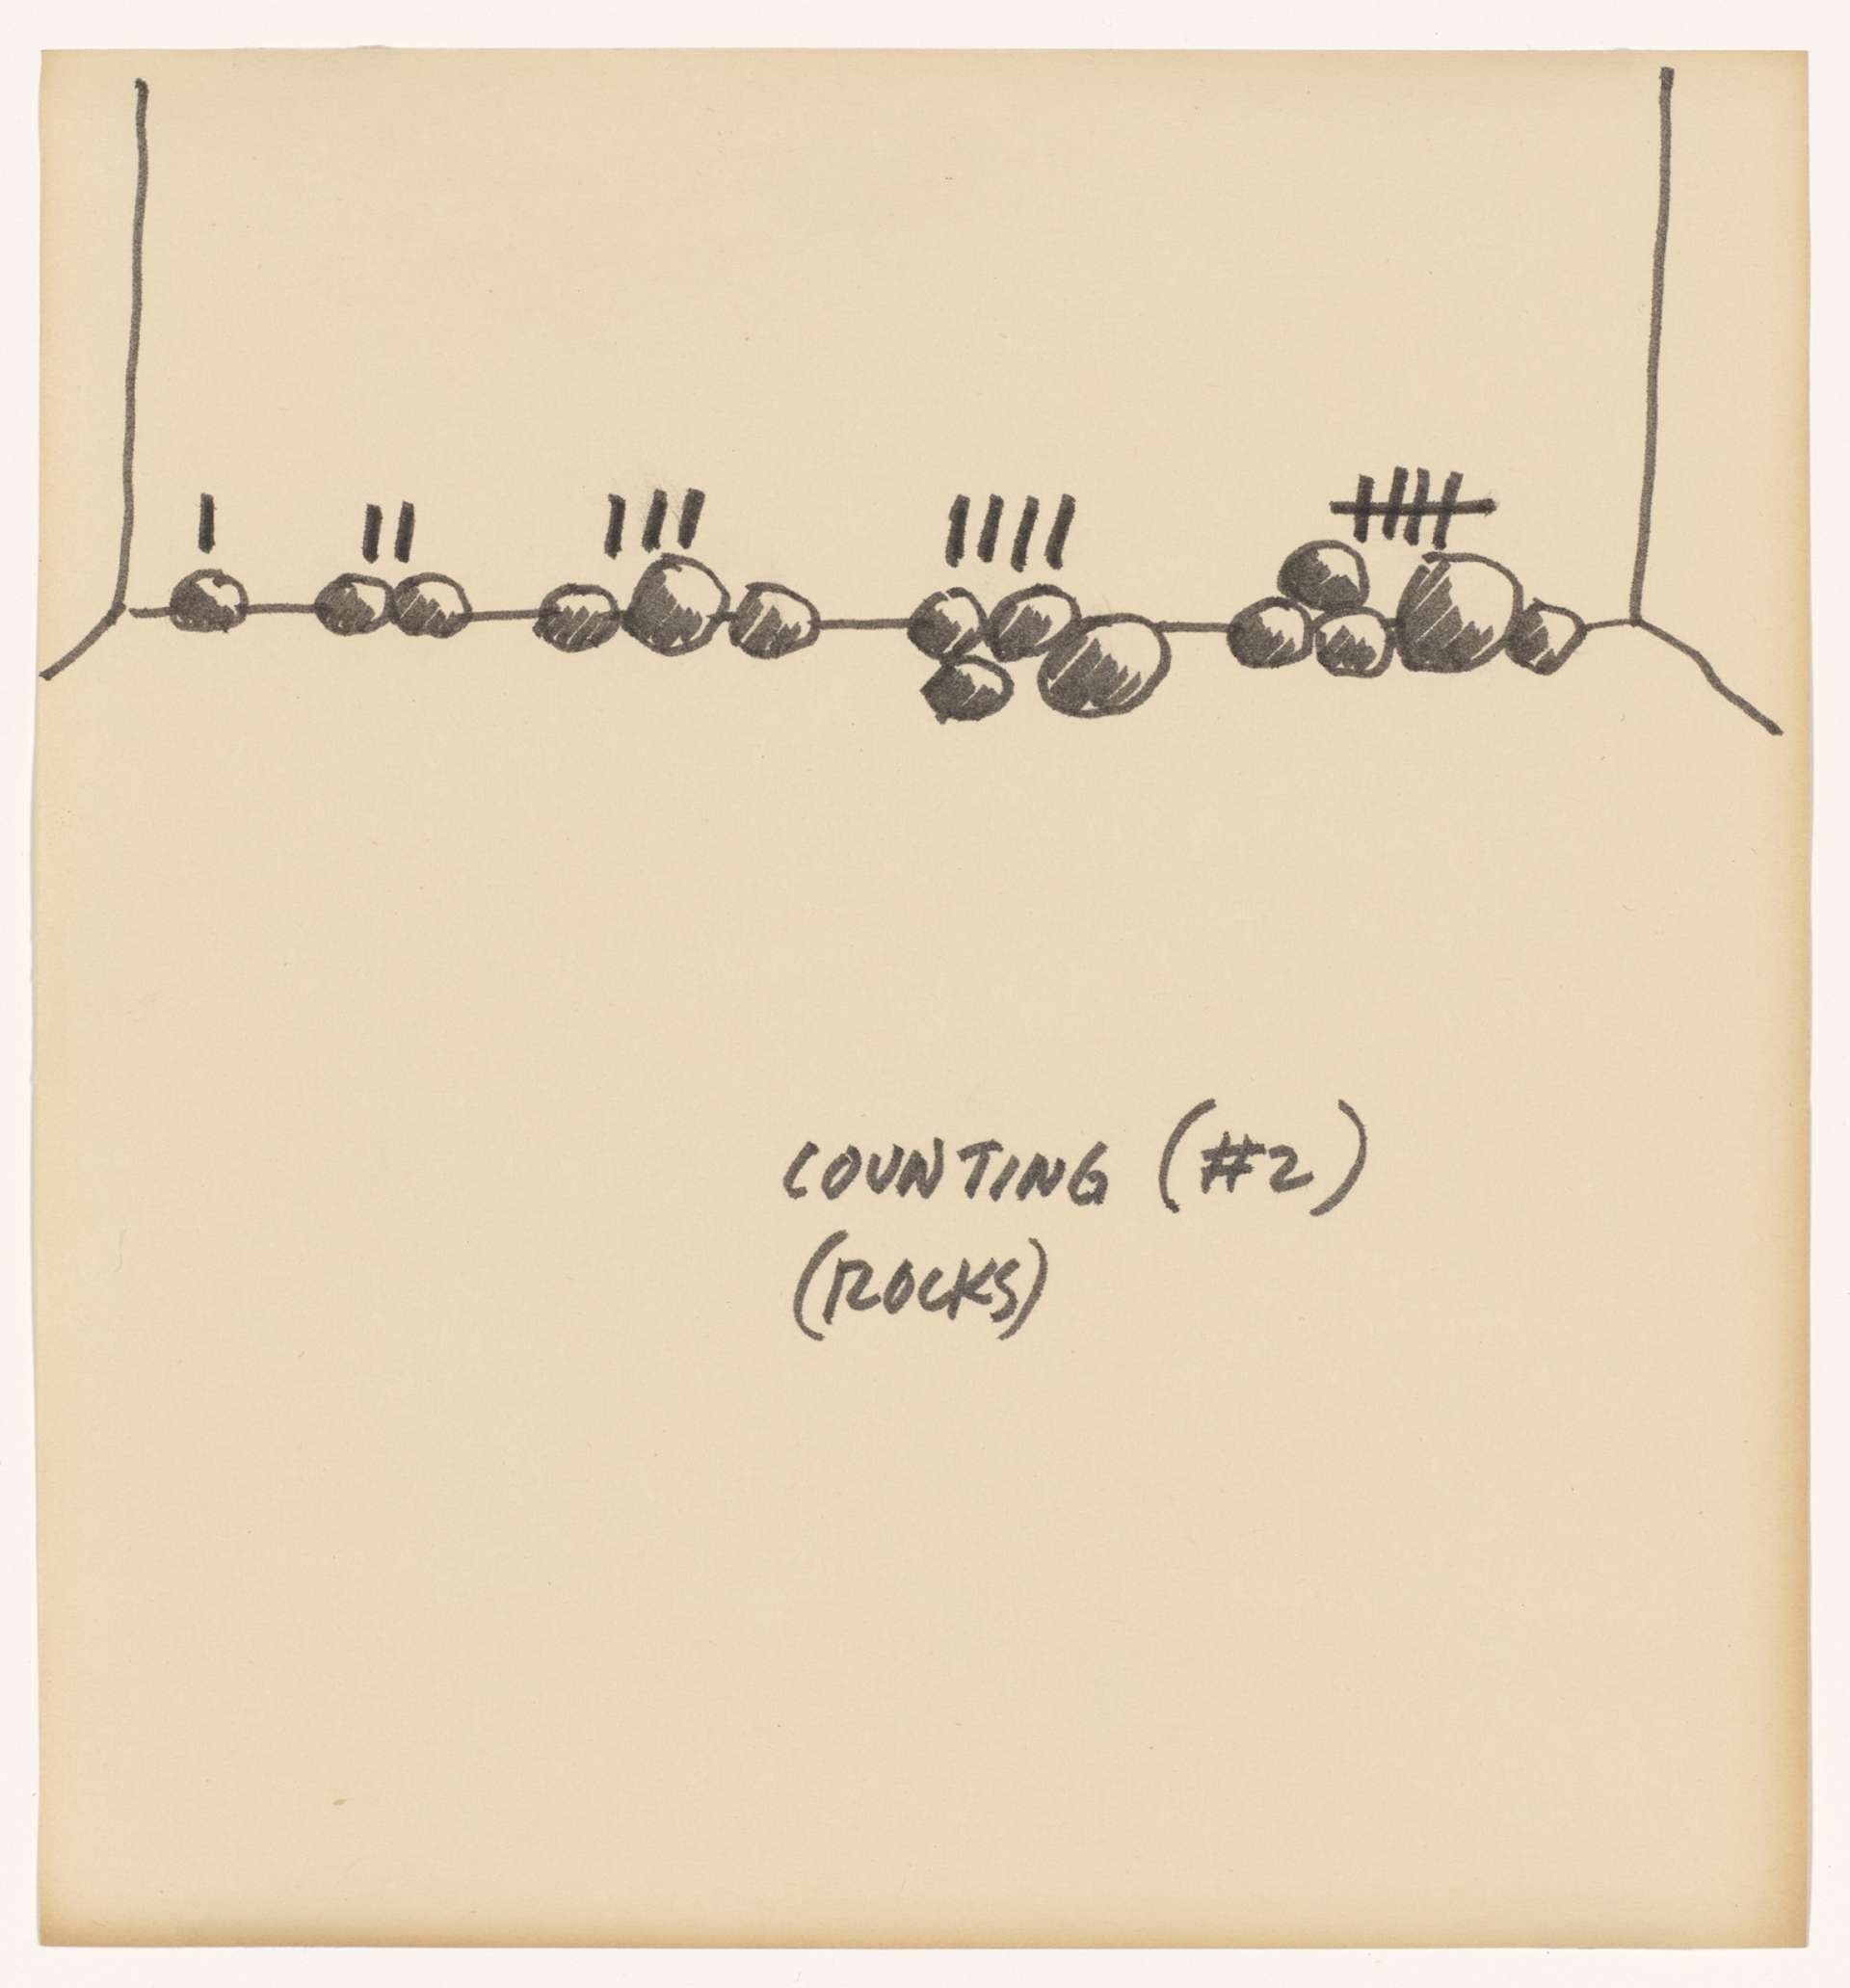 A drawing by Mel Bochner featuring simplistically drawn rocks arranged in piles and a row, with the number of rocks tallied above each pile. The title "Counting (#2) (Rocks)" is written below the artwork.